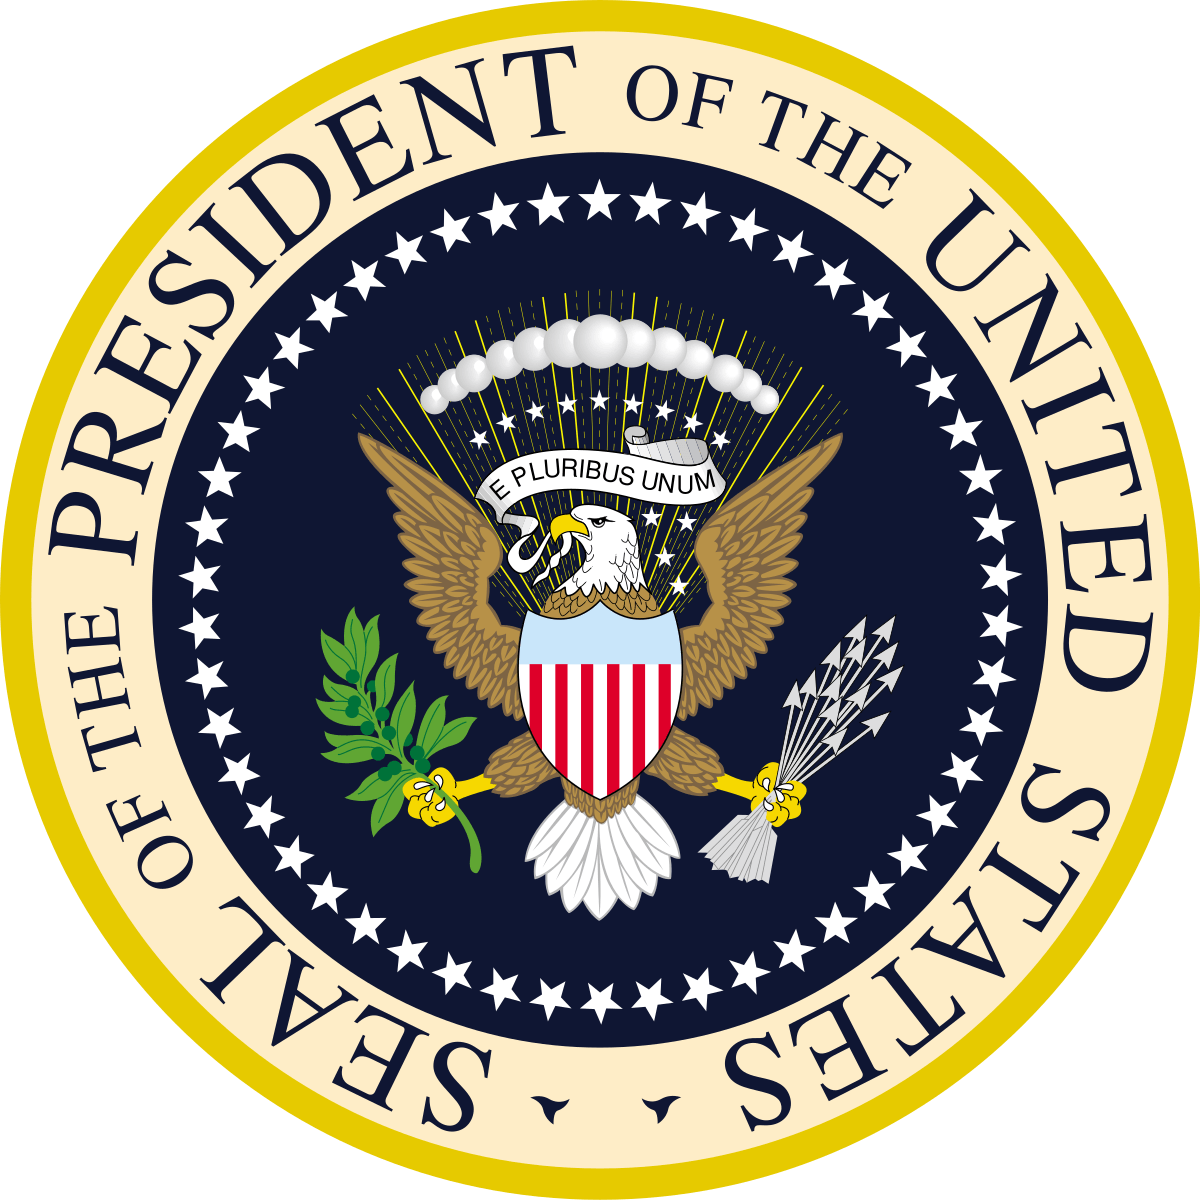 USA Eagle Logo - Seal of the President of the United States